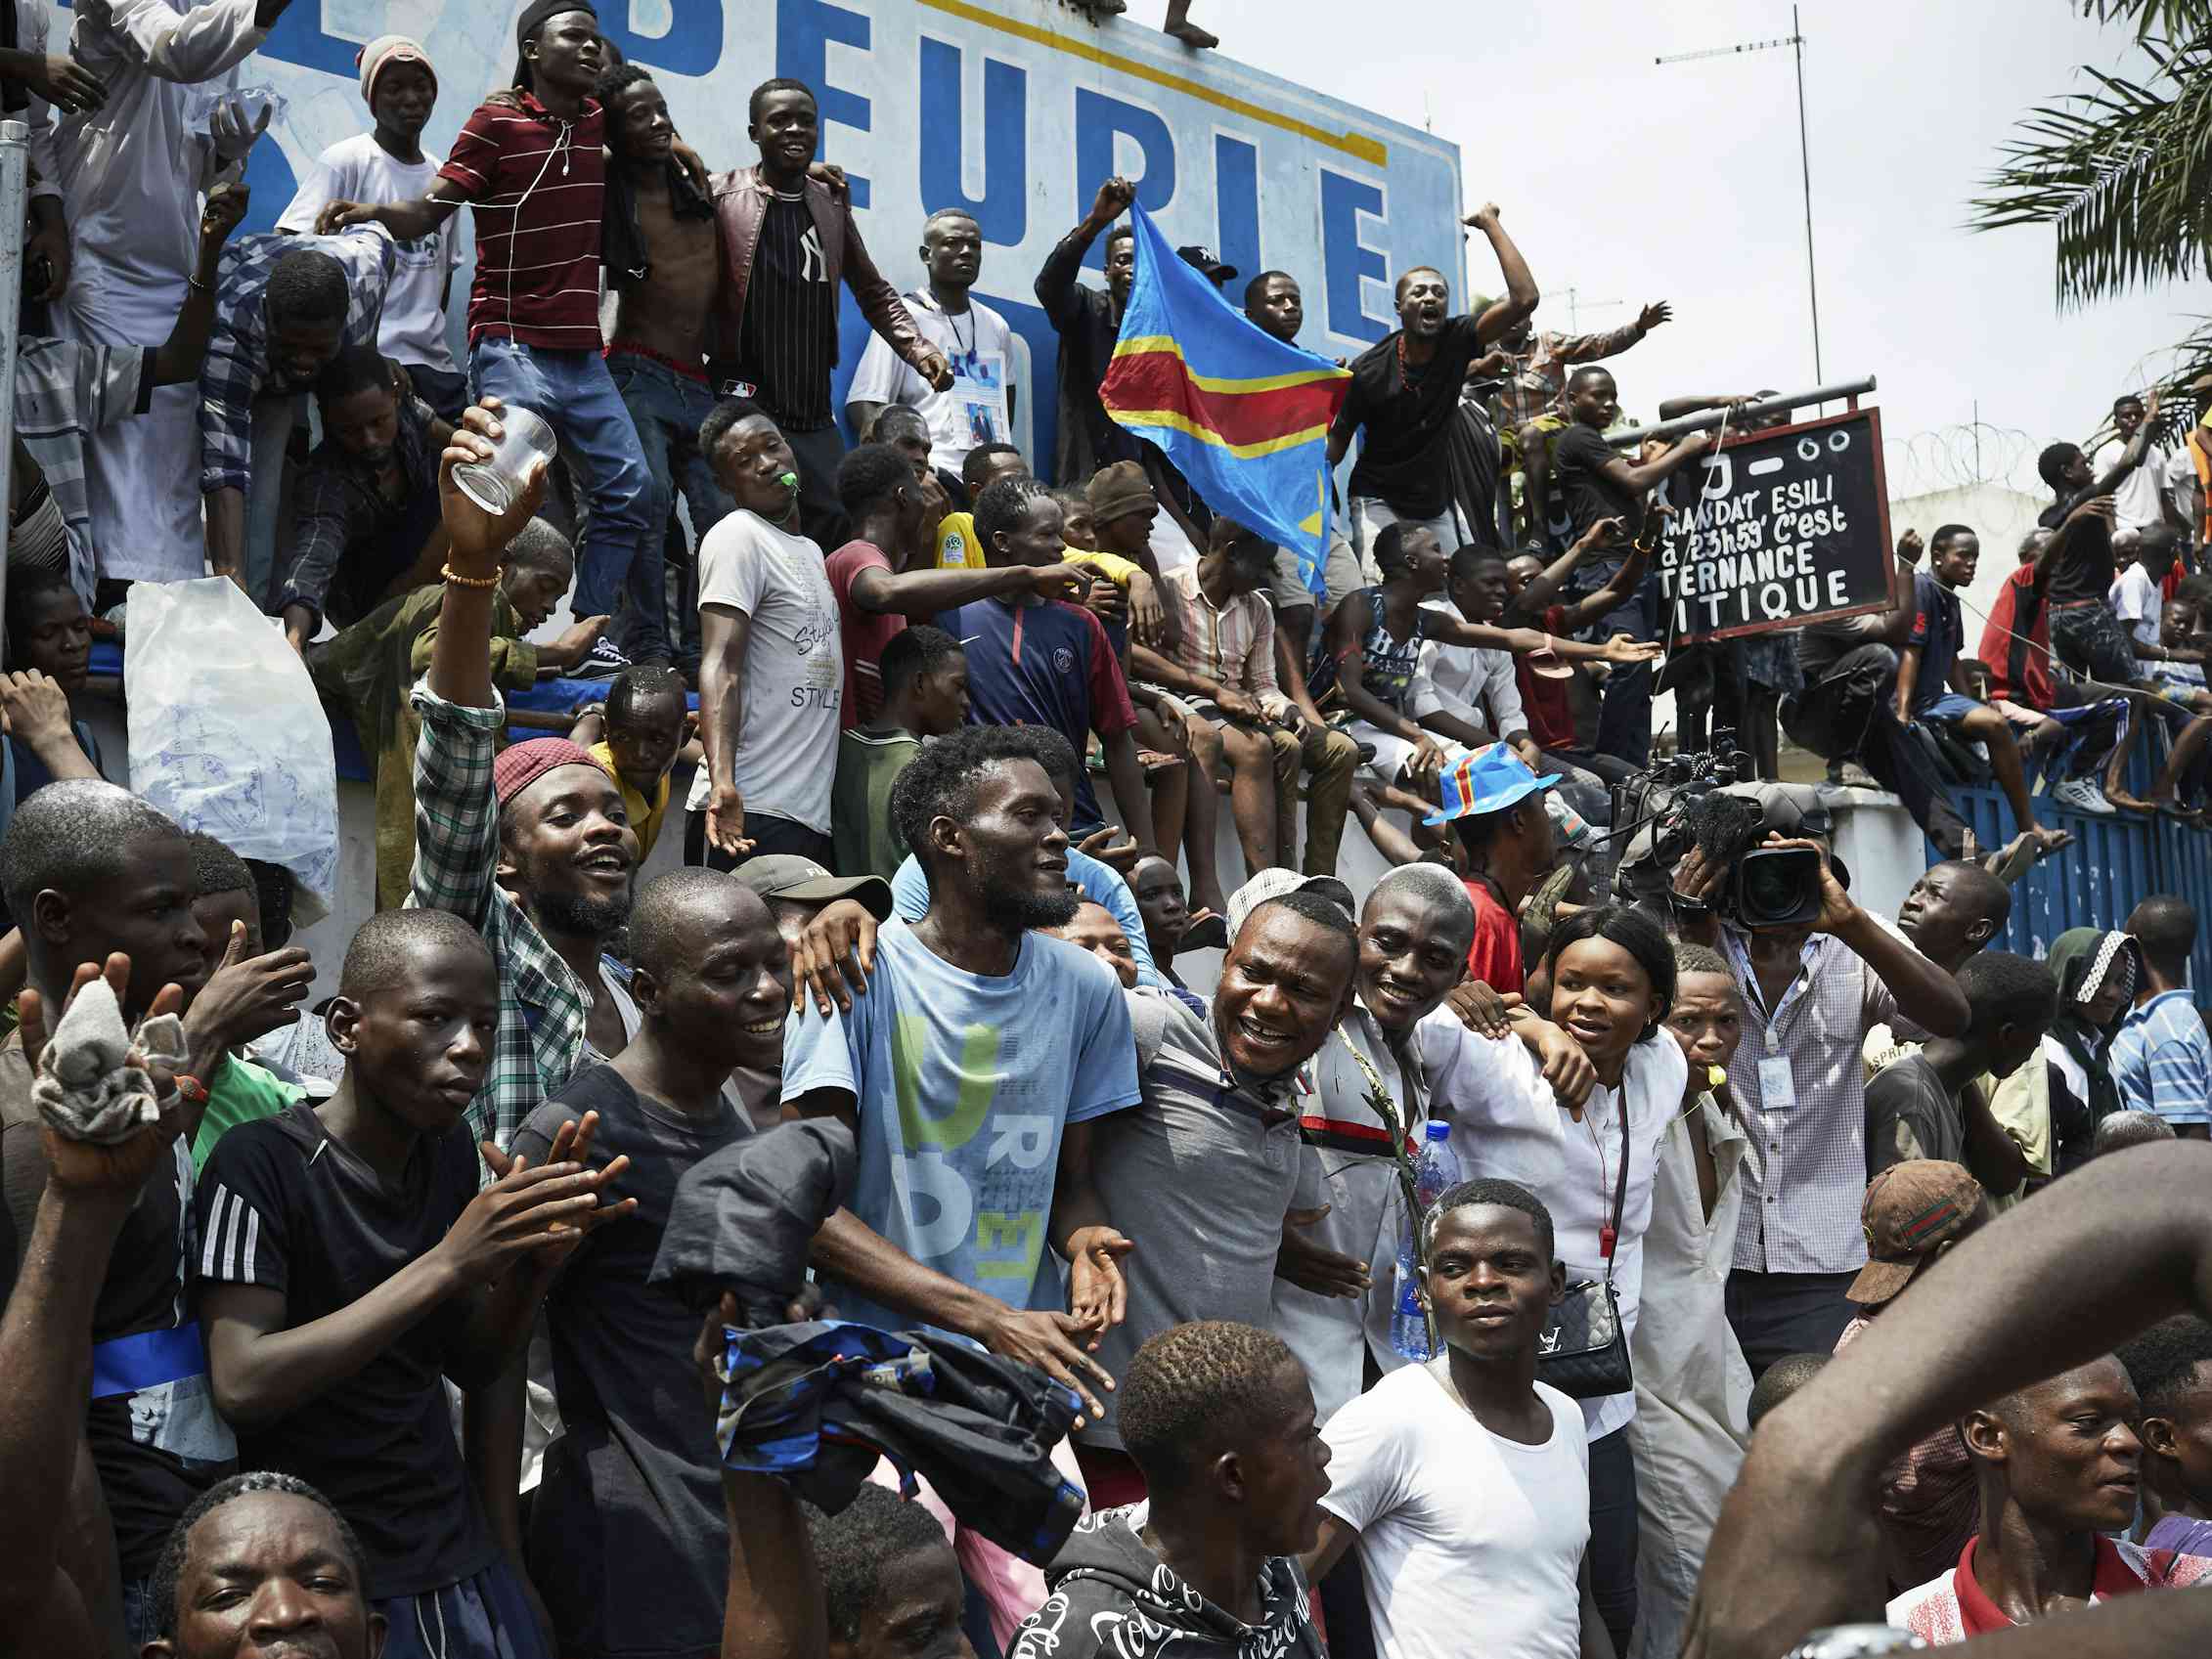 Democratic Republic of the Congo election results contested, but